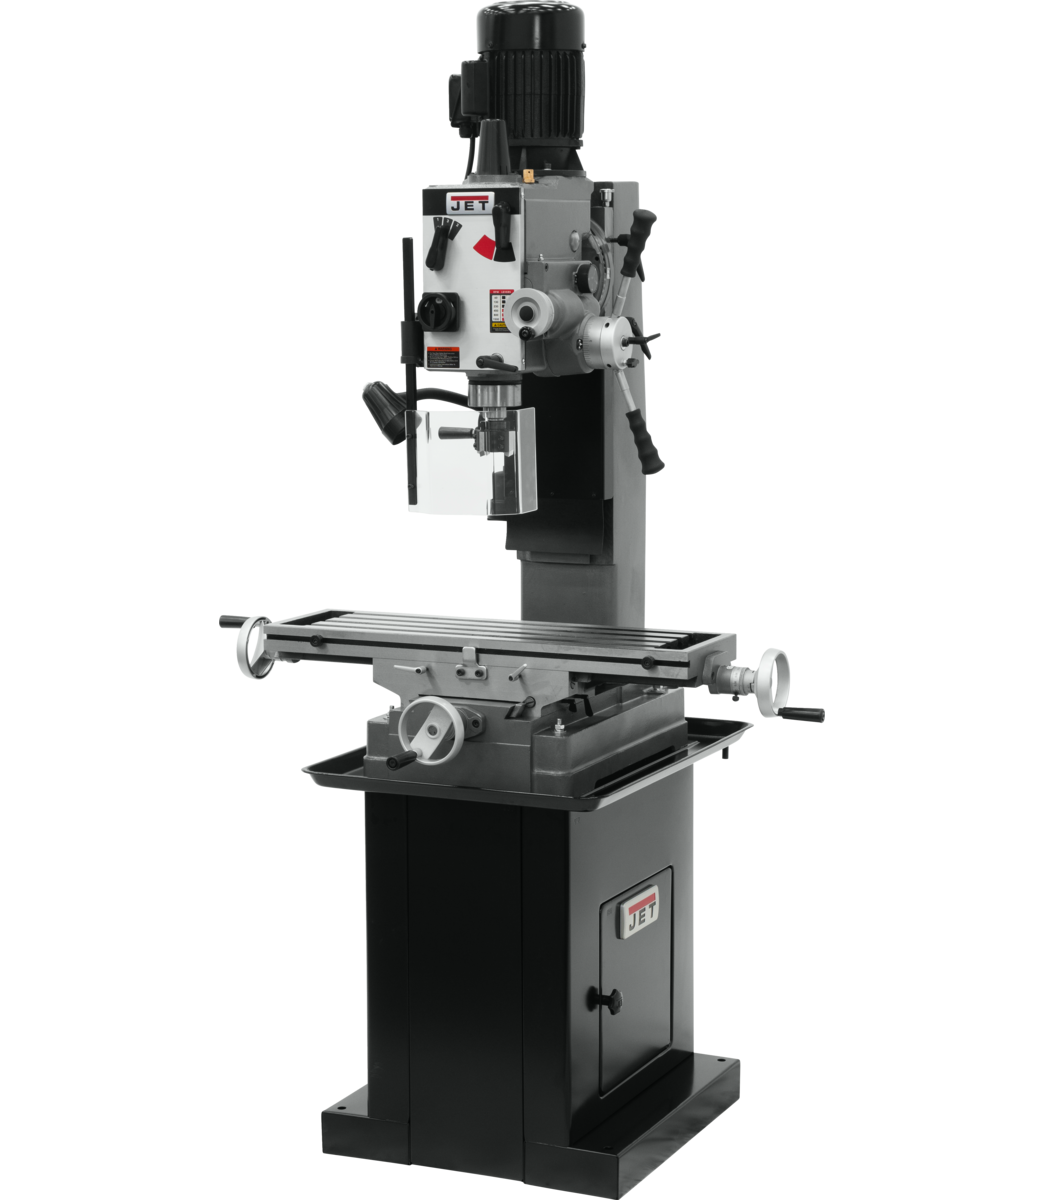 JMD-45GHPF Geared Head Square Column Mill Drill with Power Downfeed with DP700 2 Axis DRO